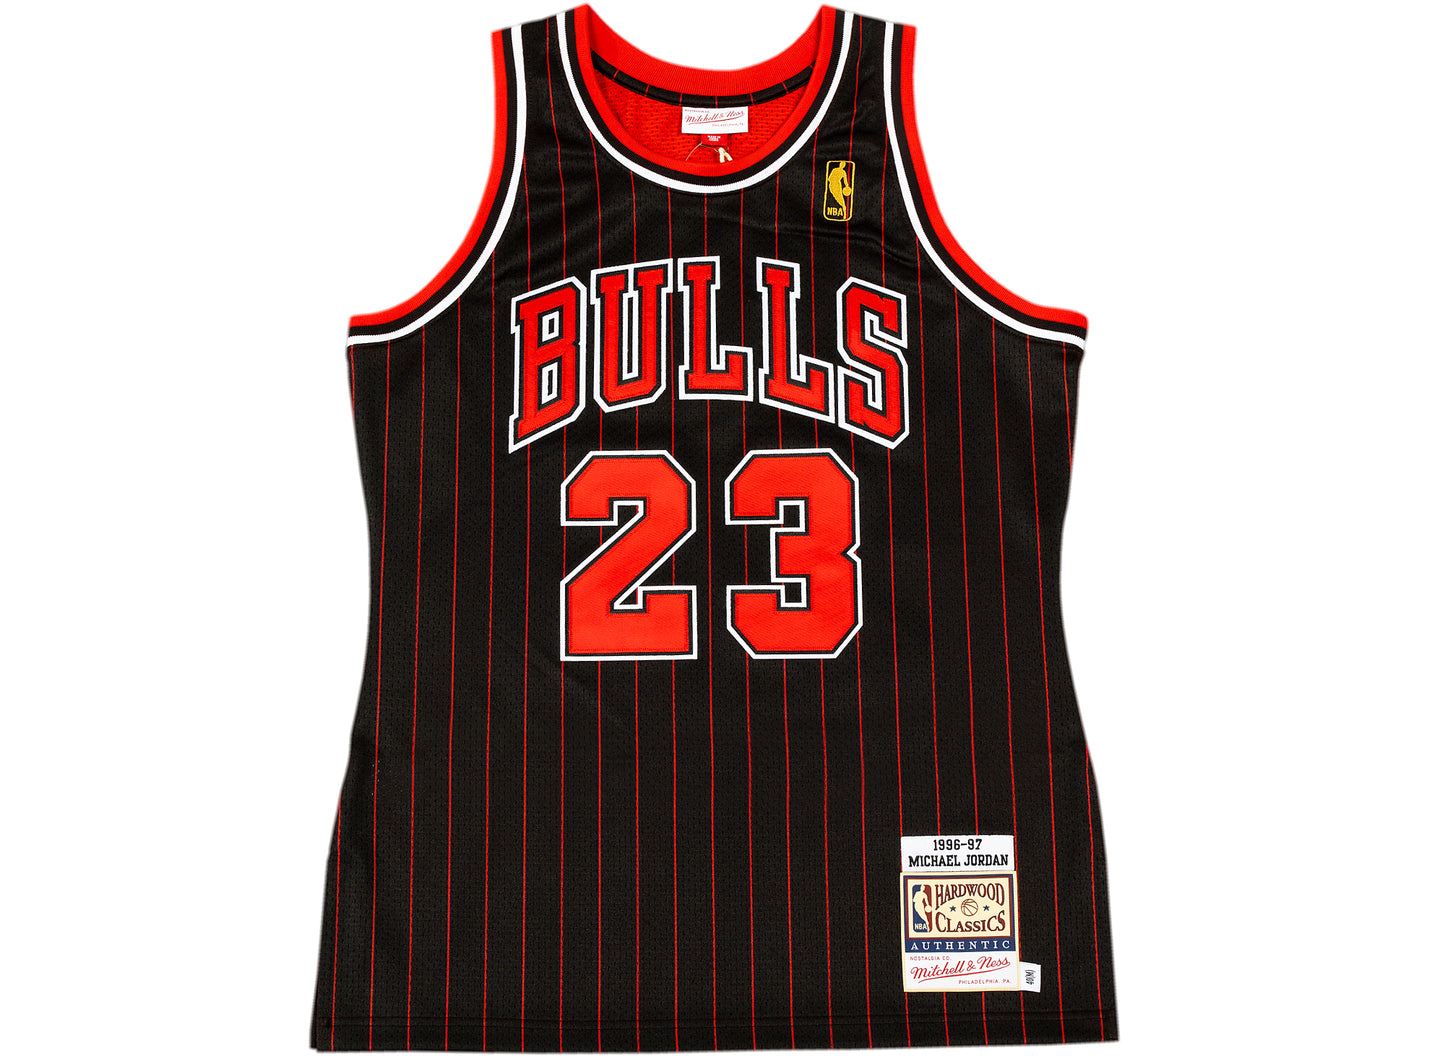 Mitchell & Ness - New NBA Authentic Jerseys Available Now